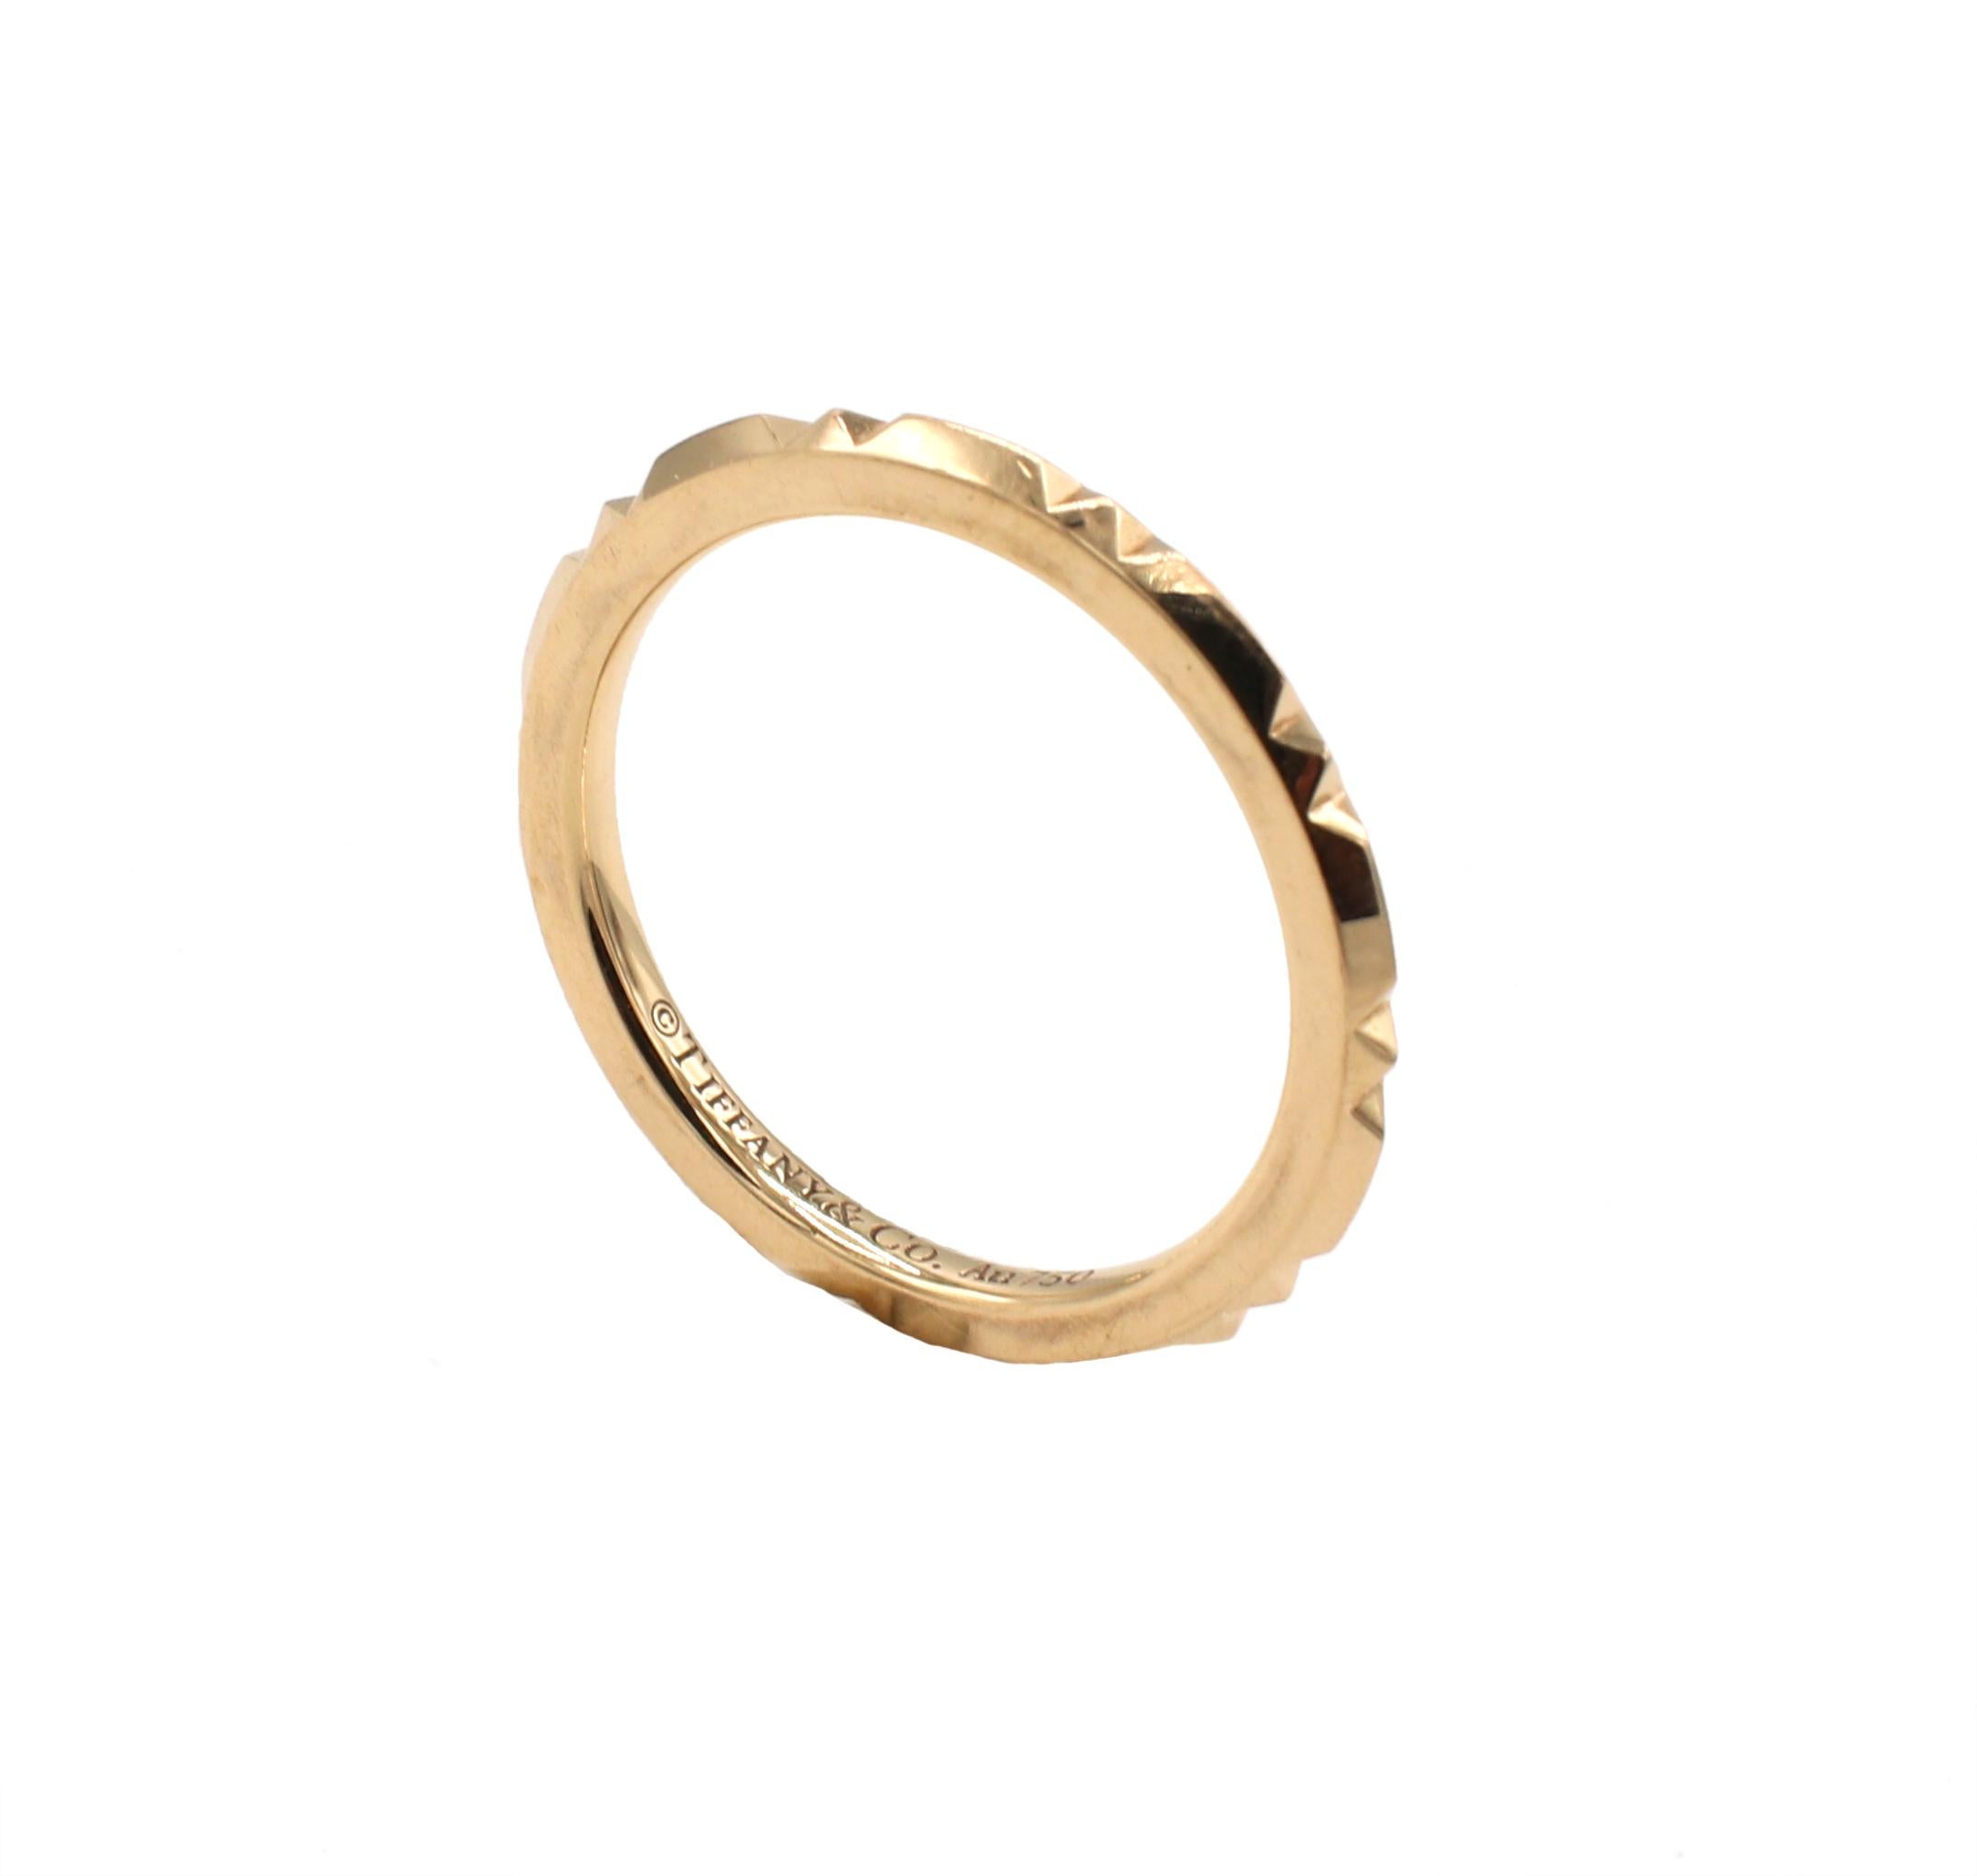 Tiffany & Co. True Collection 18 Karat Rose Gold Thin Band Ring

Metal: 18k rose gold
Weight: 1.93 grams
Size: 4 (US)
Width: 1.5mm
Signed: Tiffany & Co. Au750